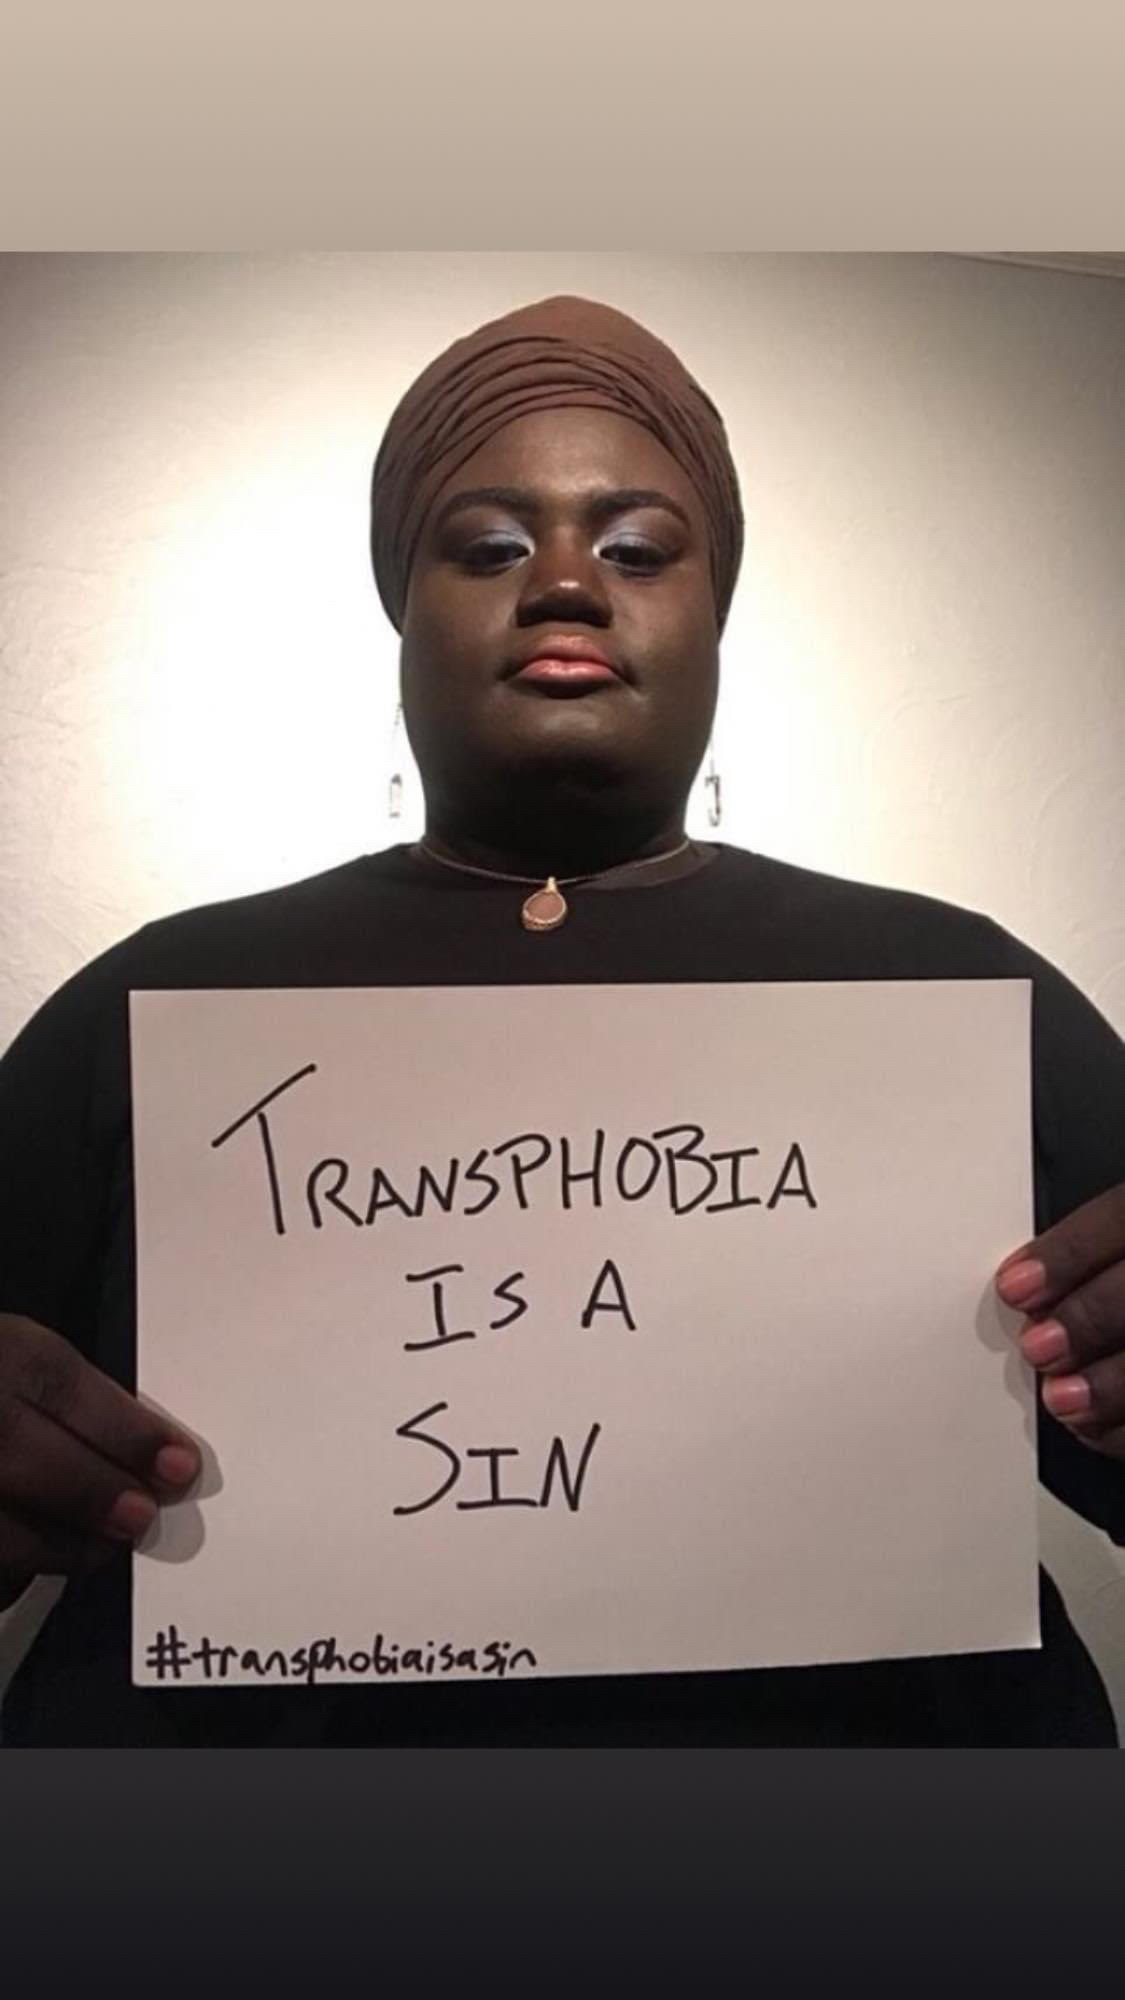 Dark skinned Black Transfemme person with a full beat face staring into the camera while baring a sign declaring Transphobia Is a Sin